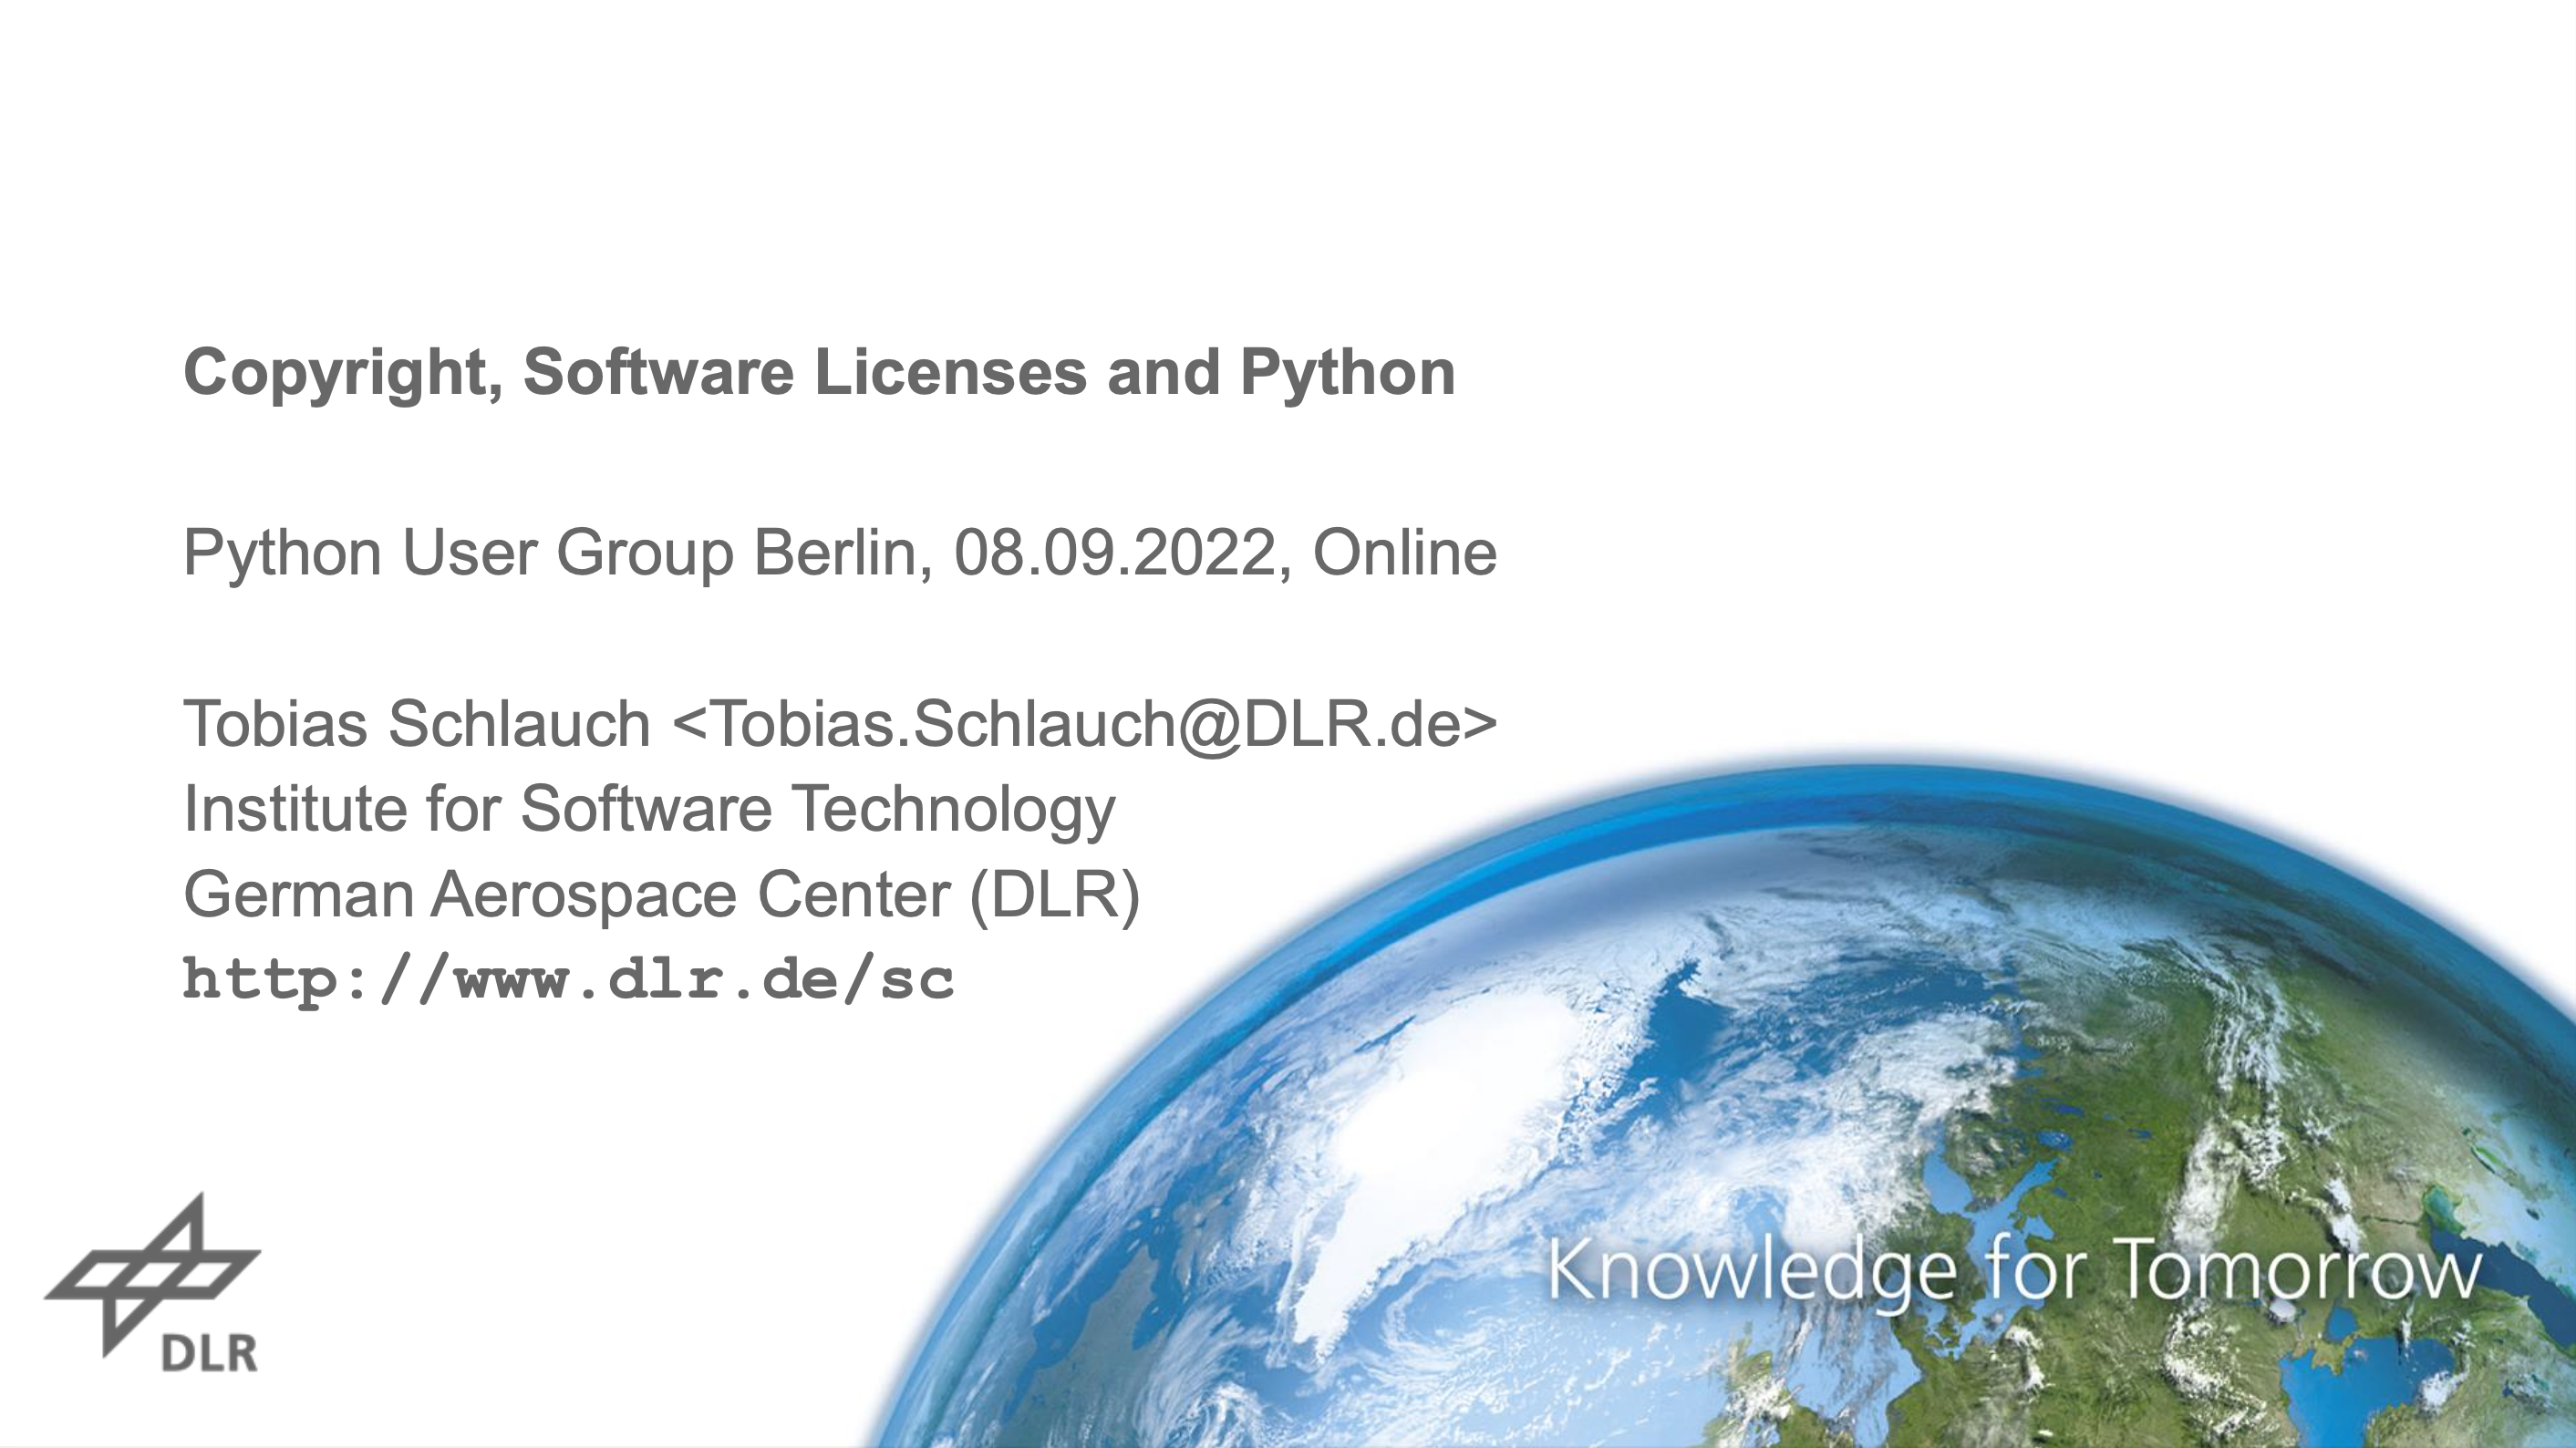 «Copyright, Software Licenses and Python» by Tobias Schlauch